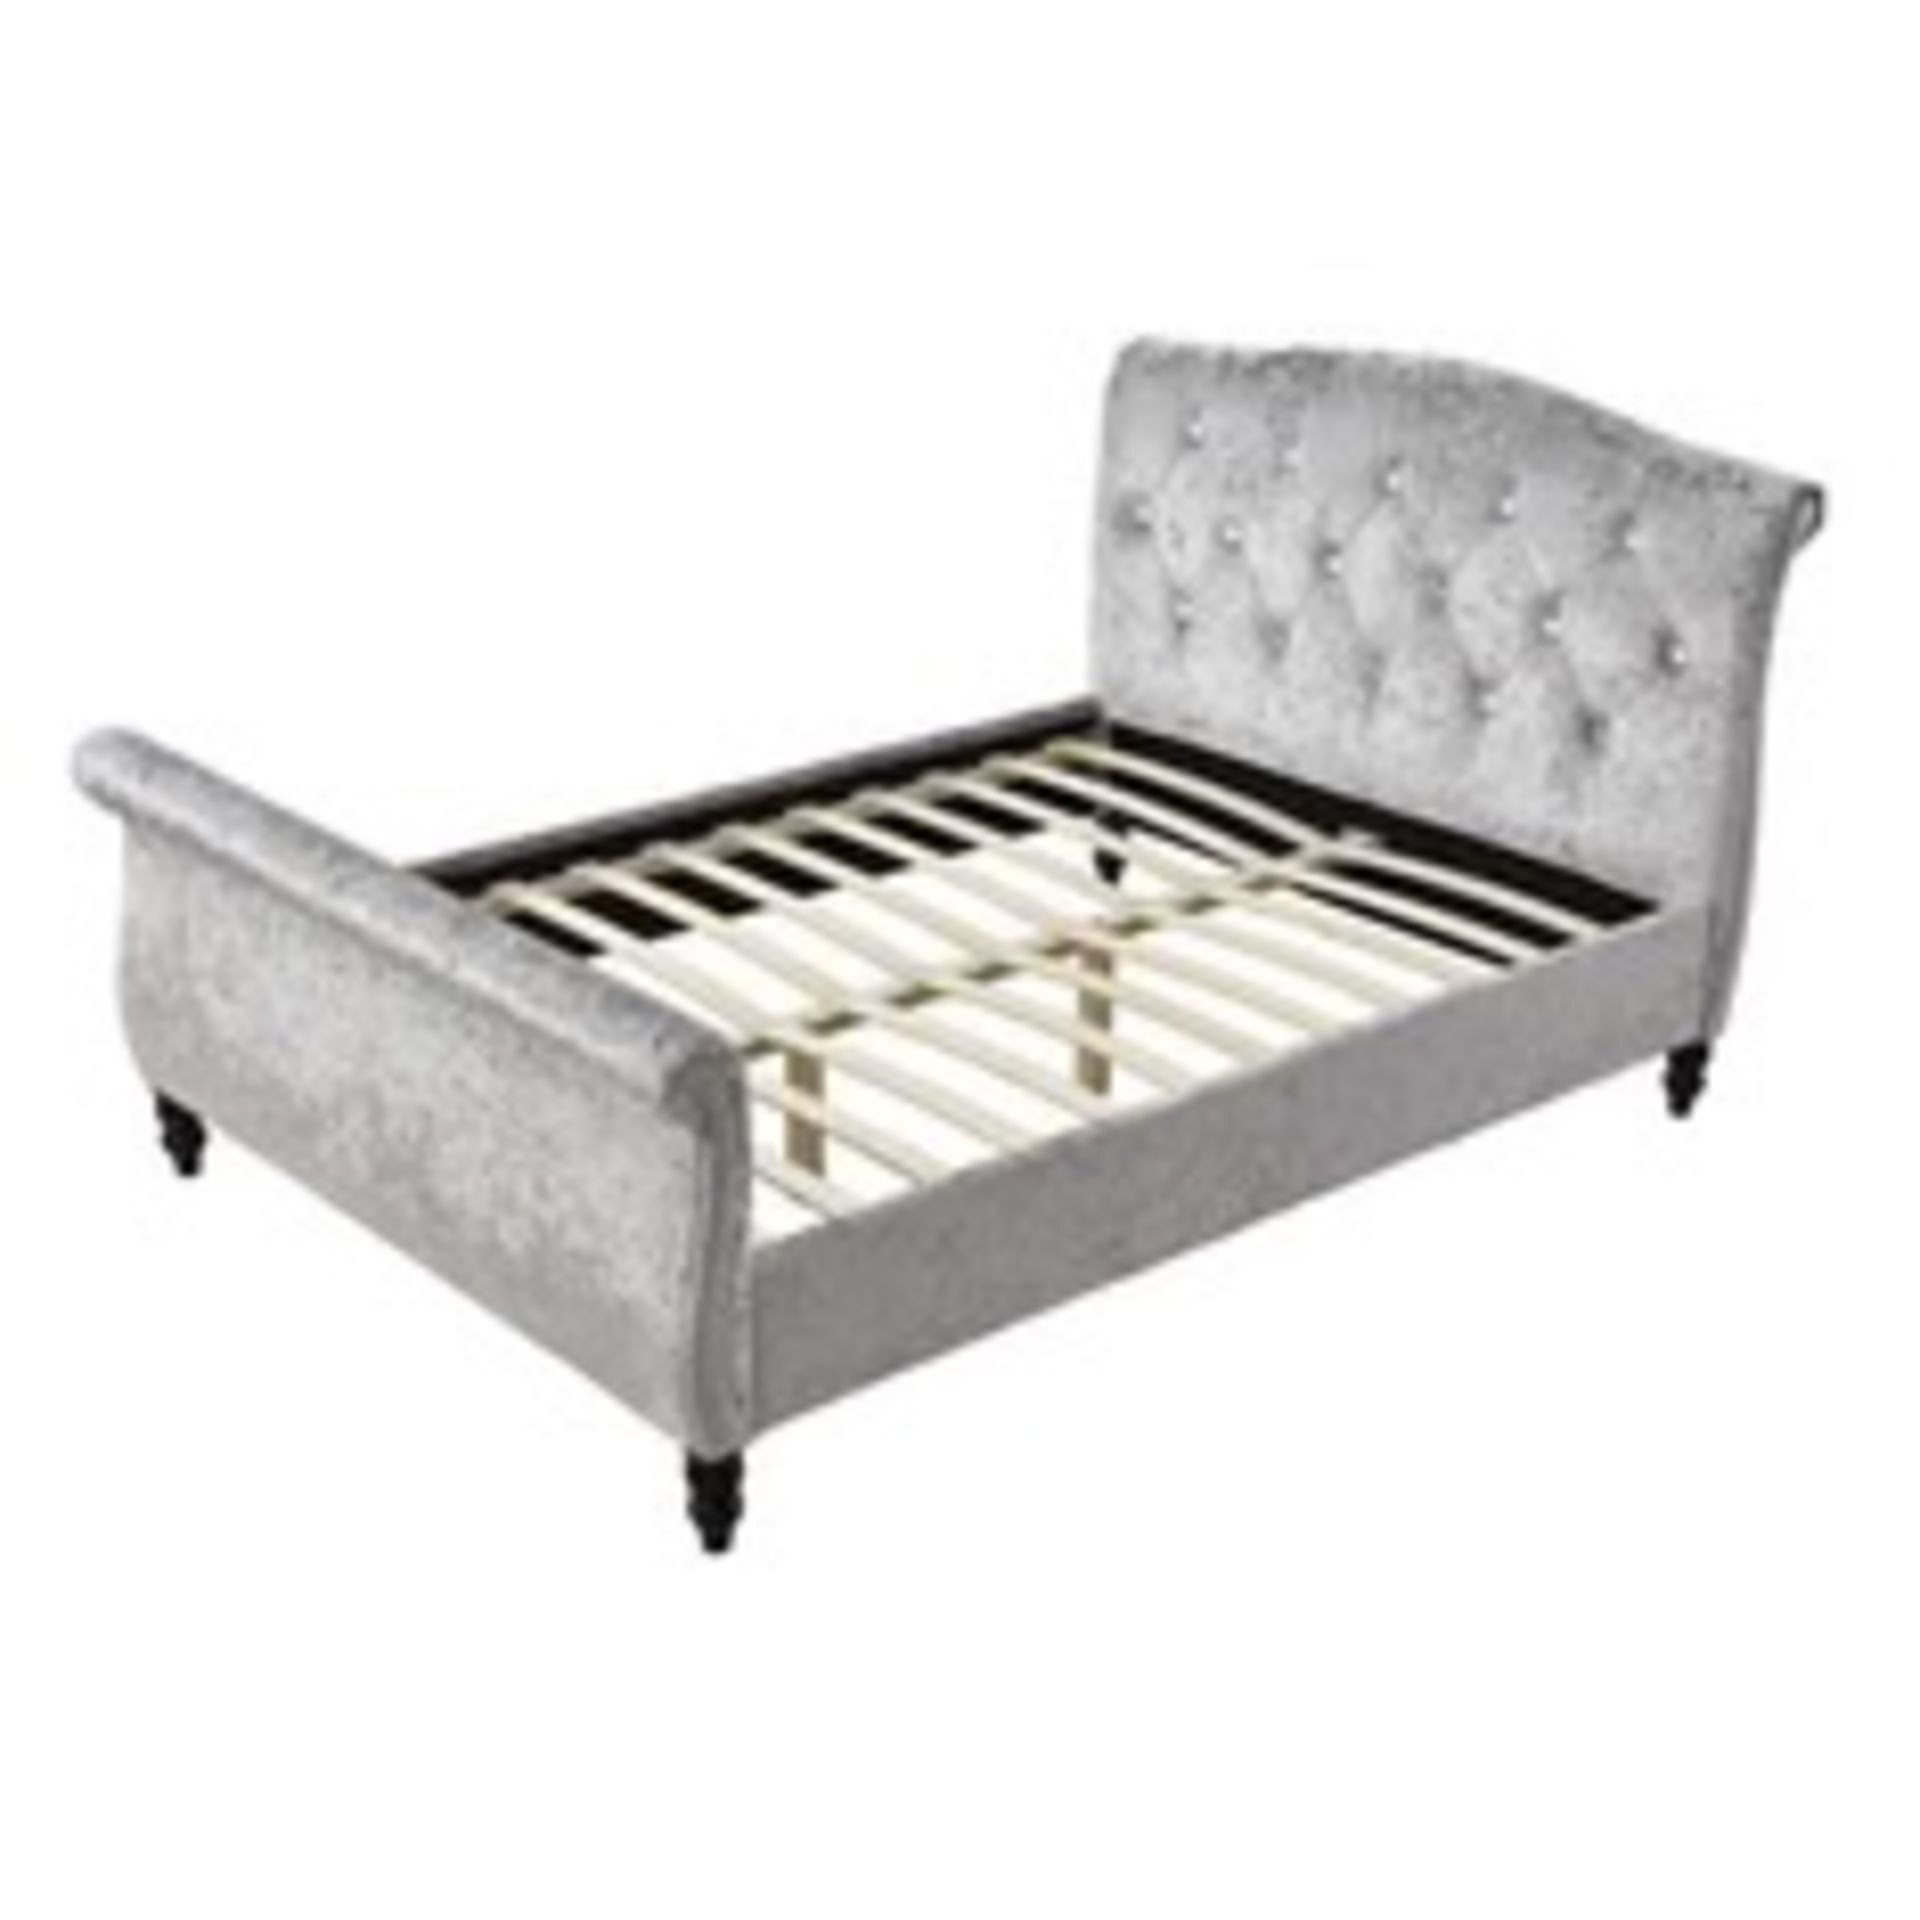 LOT CONTAINING 10 X MEISSA CRUSHED VELVET UPHOLSTERED SLEIGH BED WITH DIAMANTE HEADBOARD, SILVER - Bild 2 aus 3